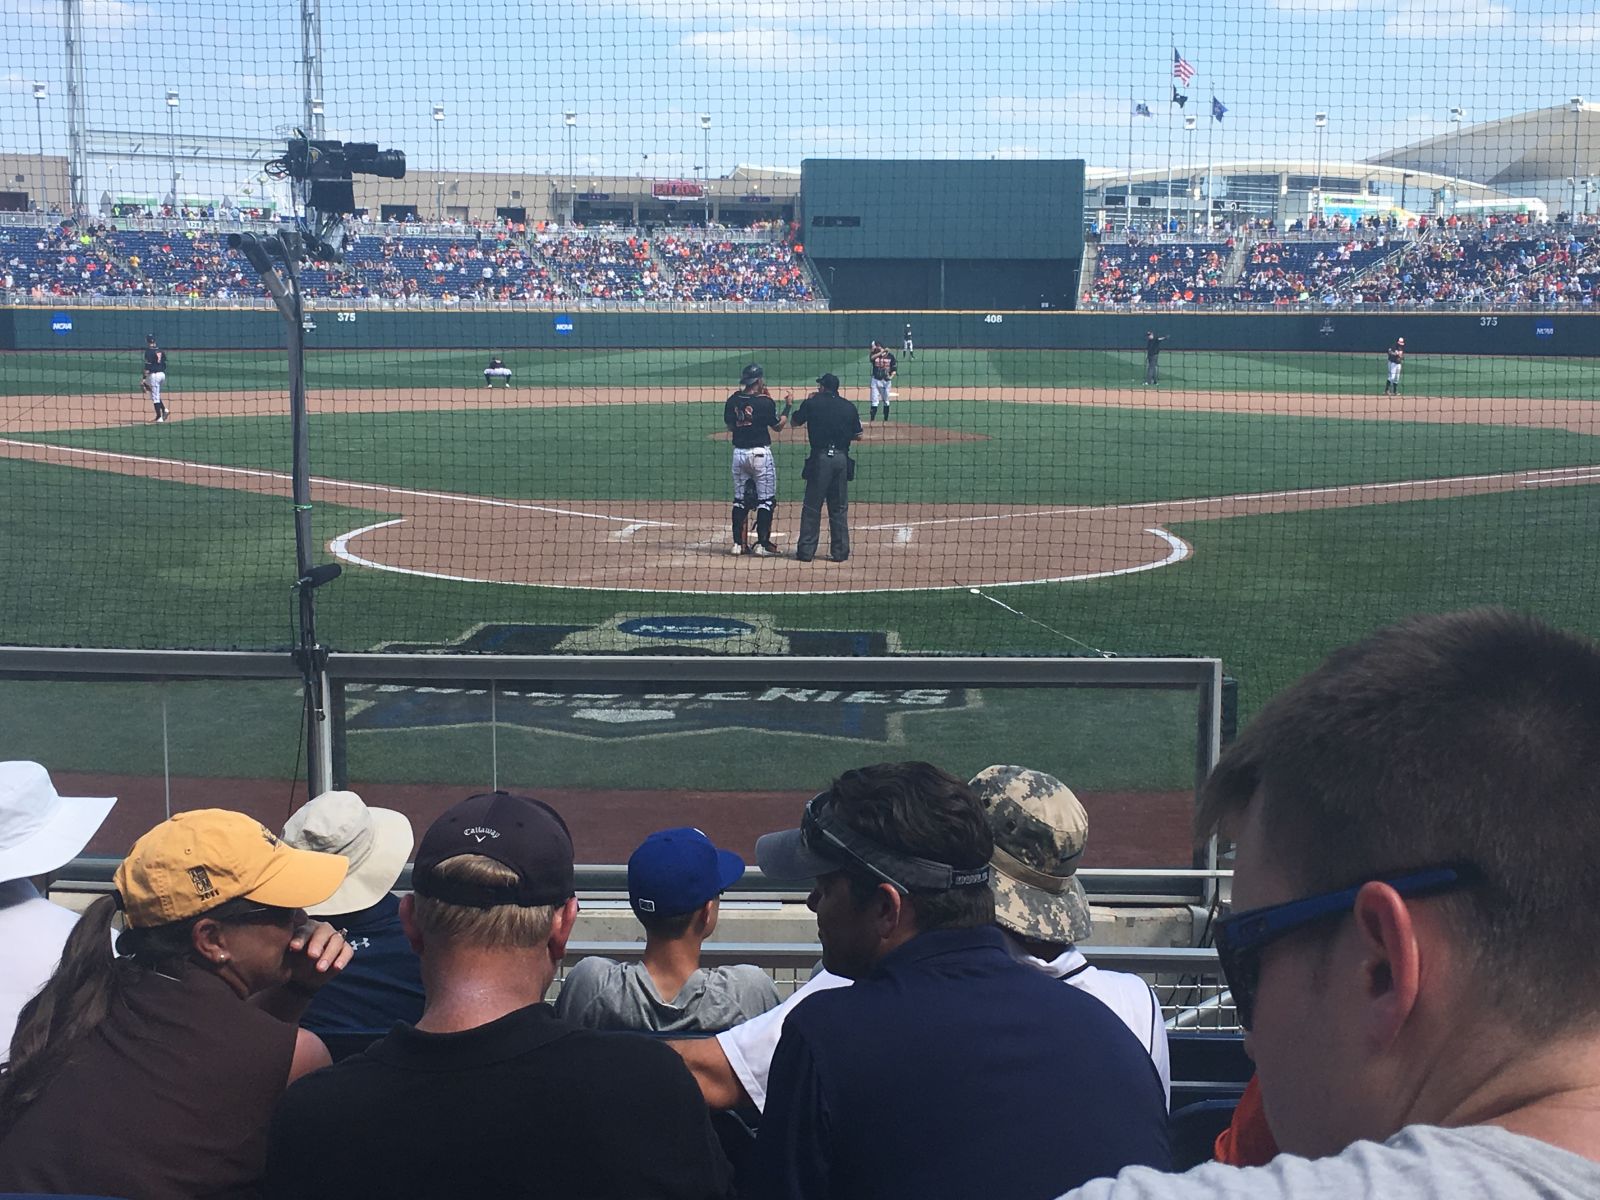 section 112, row 8 seat view  - charles schwab field